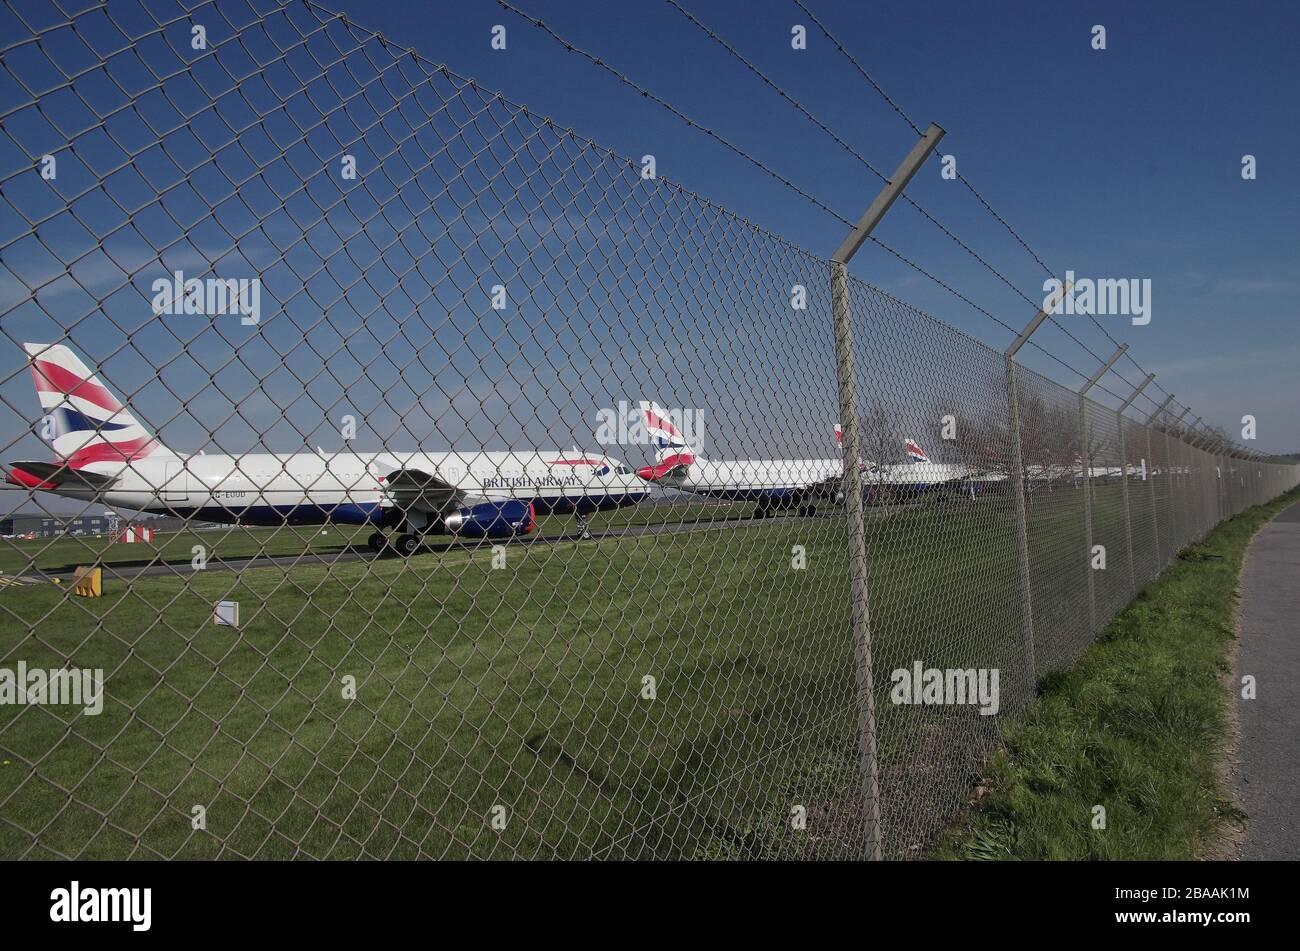 British Airways has parked rows of short-haul aircraft at Hurn Airport Bournemouth 26th March 2020. With less demand due to Covid 19 these short  haul British Airways planes are being parked around the country where there is space. Stock Photo